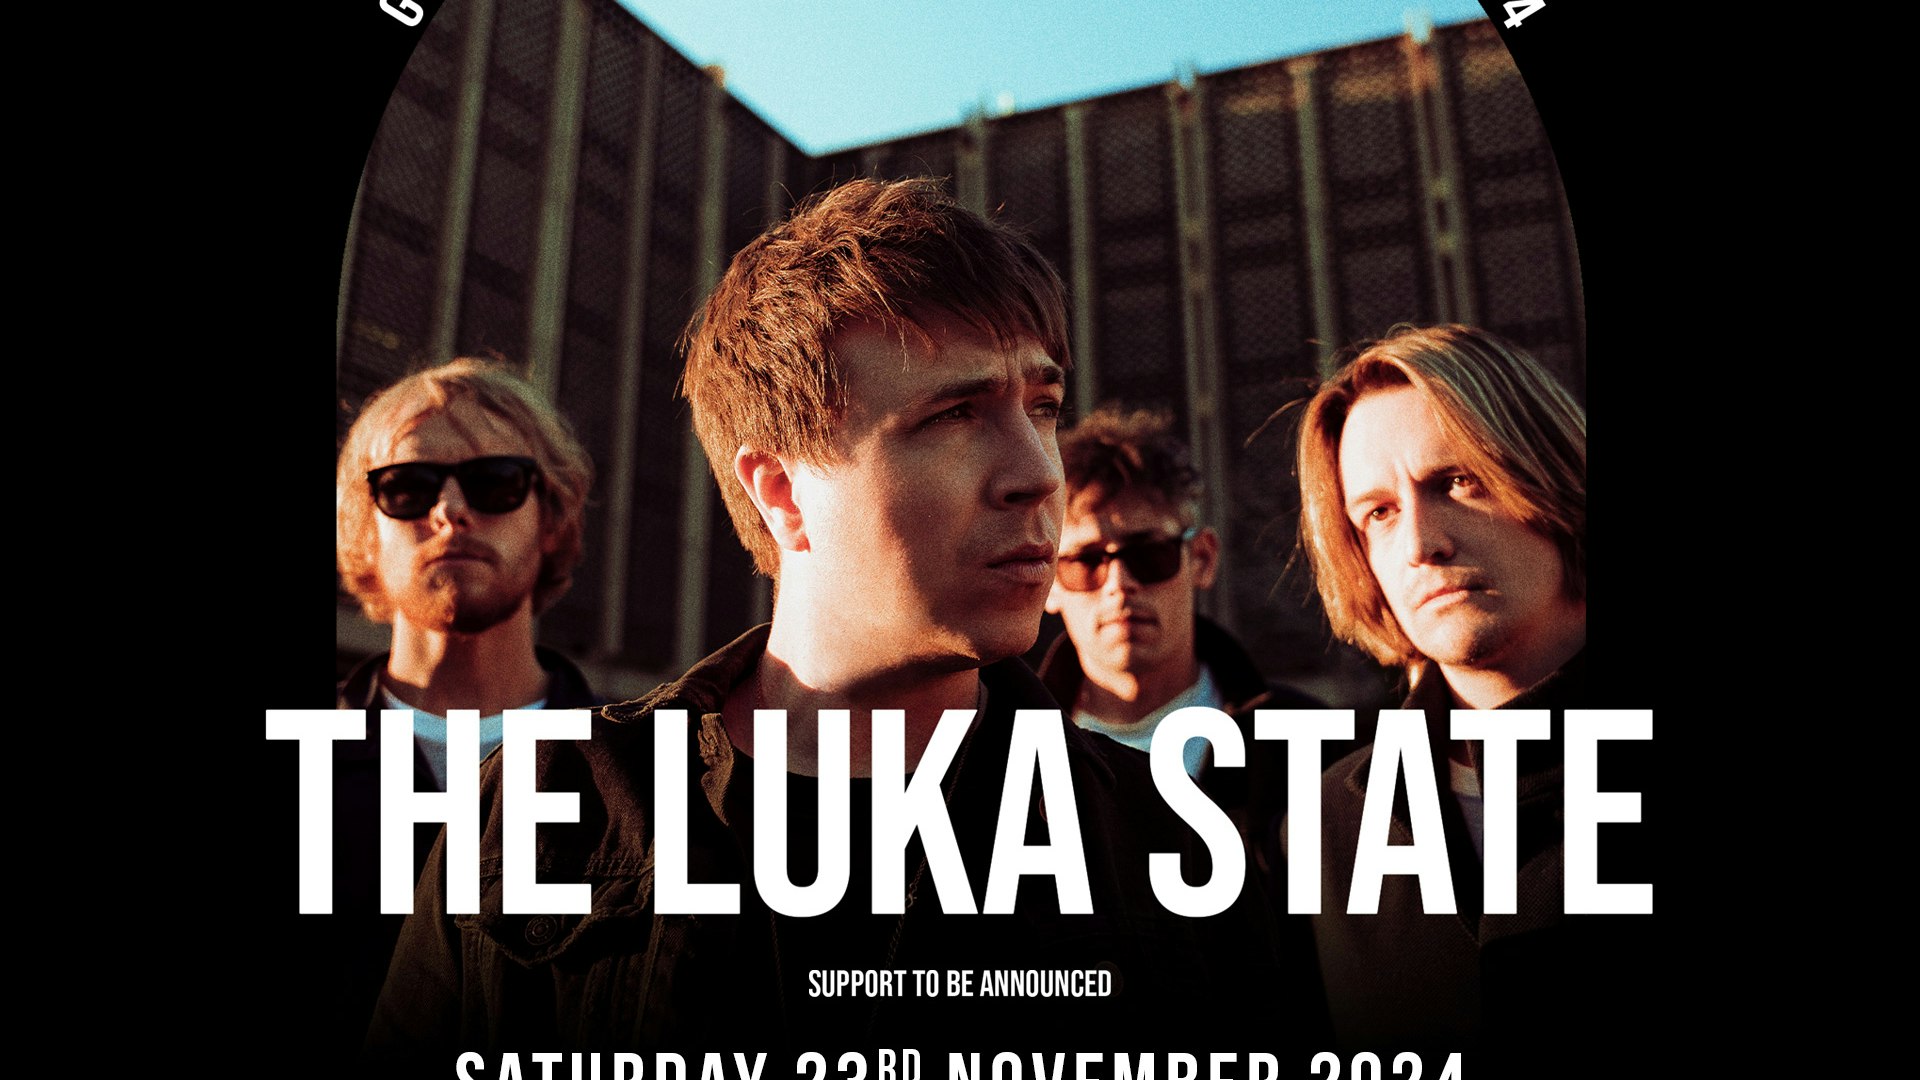 The Luka State | Record Junkee